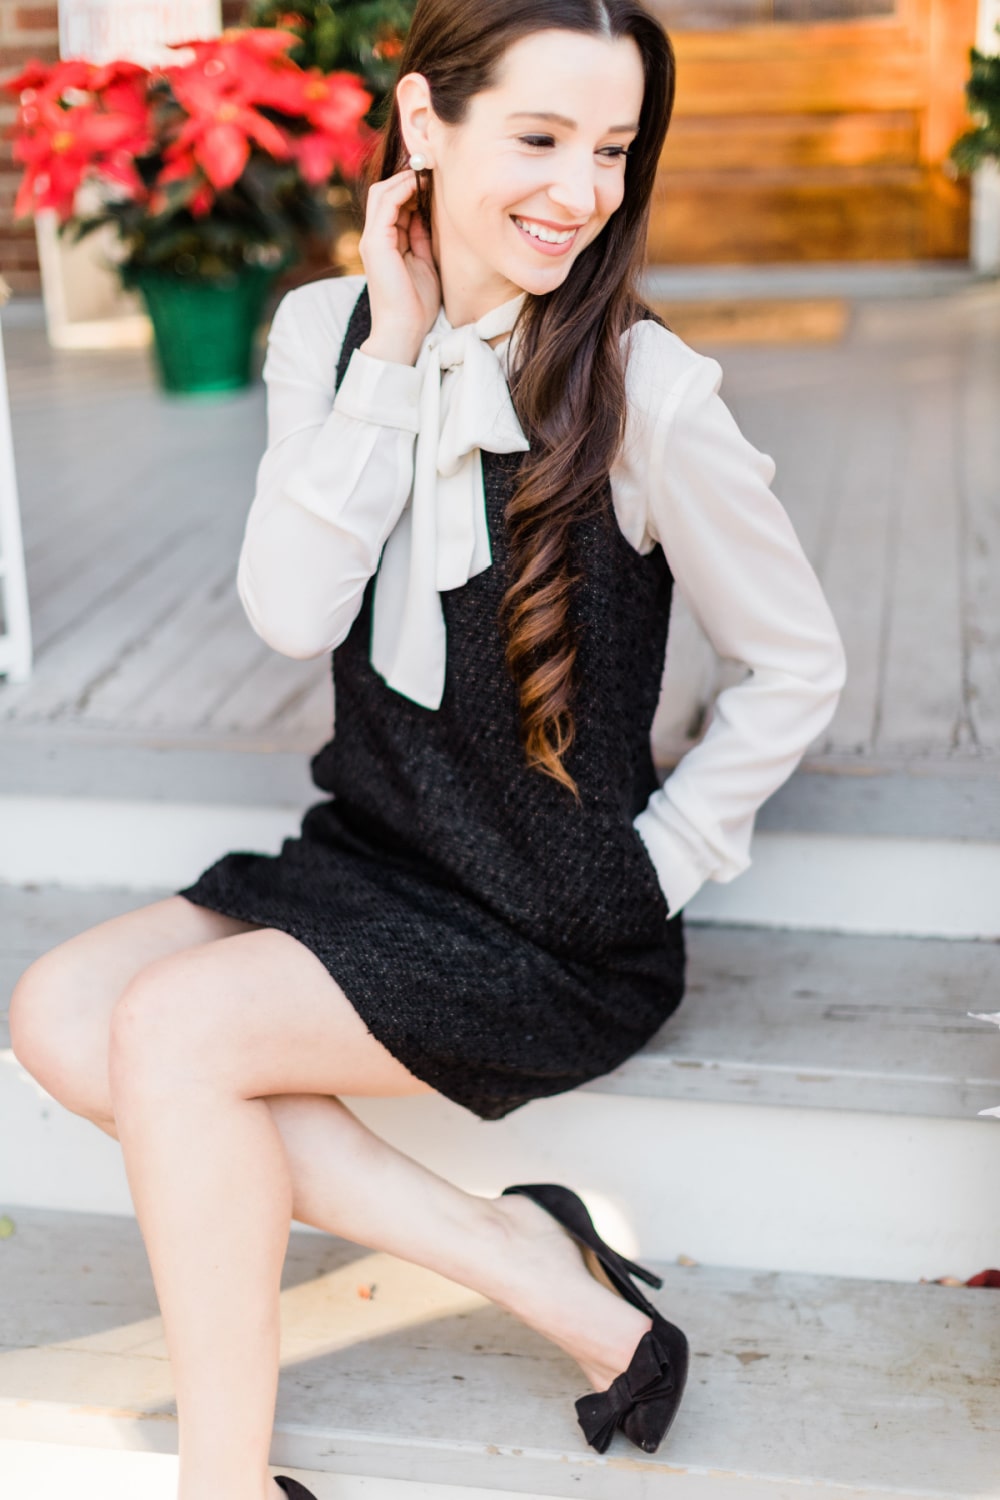 Preppy Christmas outfit idea styled by affordable fashion blogger Stephanie Ziajka on Diary of a Debutante